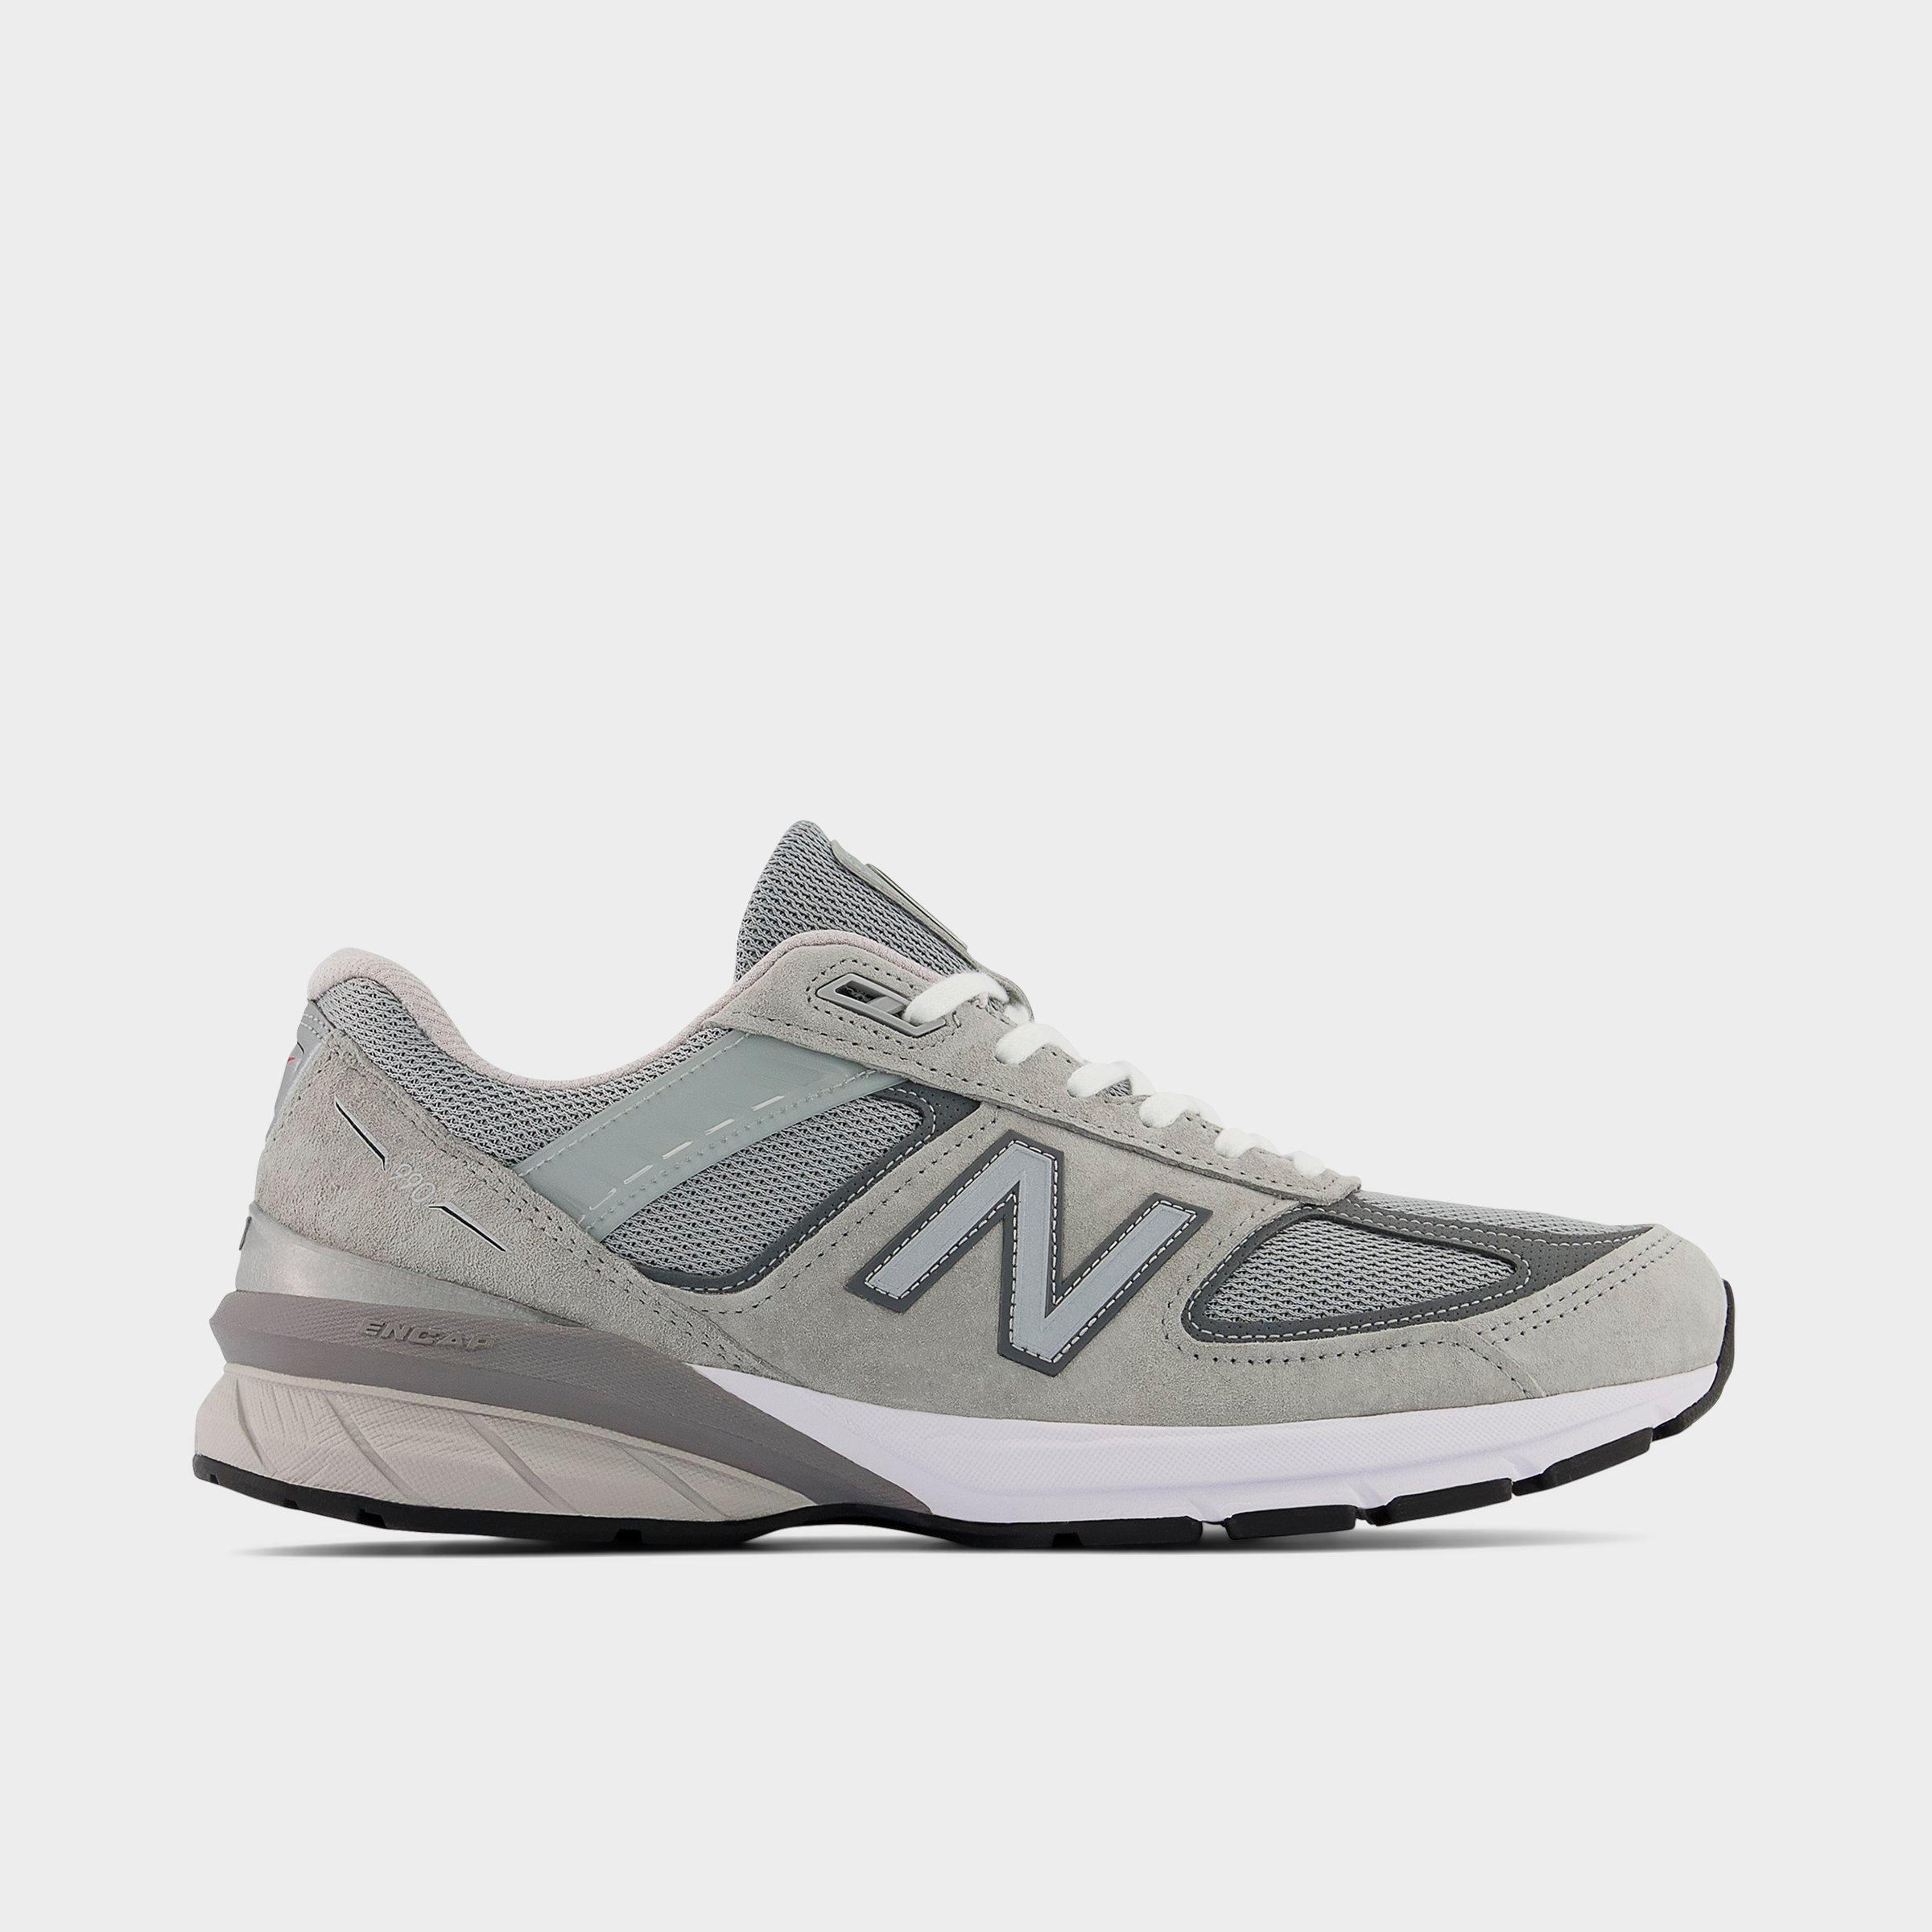 Men's New Balance 990v5 Casual Shoes 